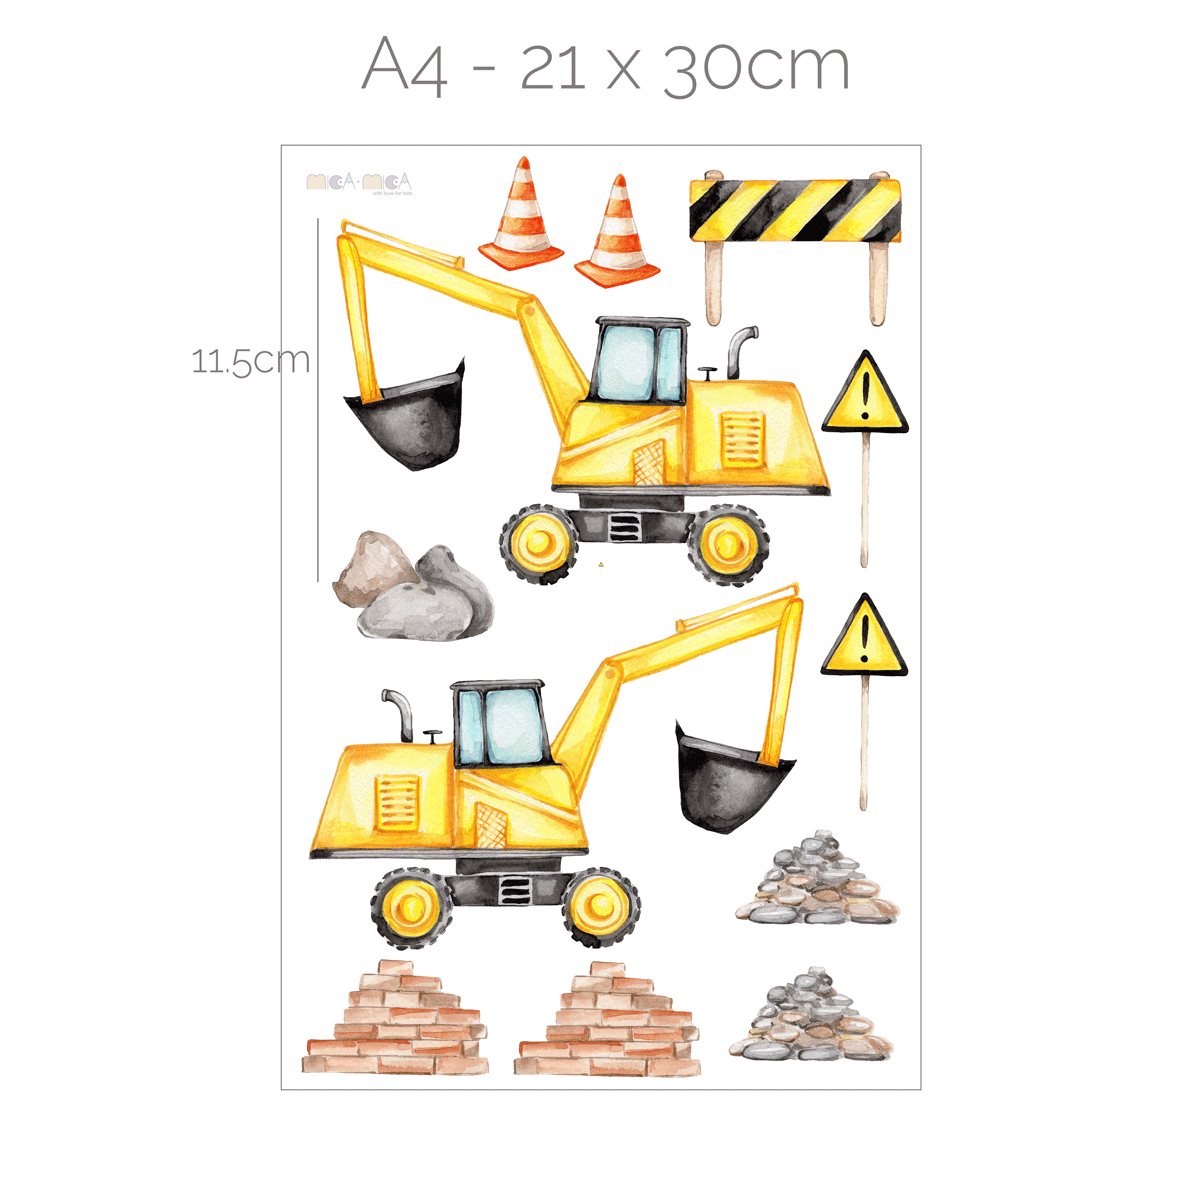 Digger wall stickers